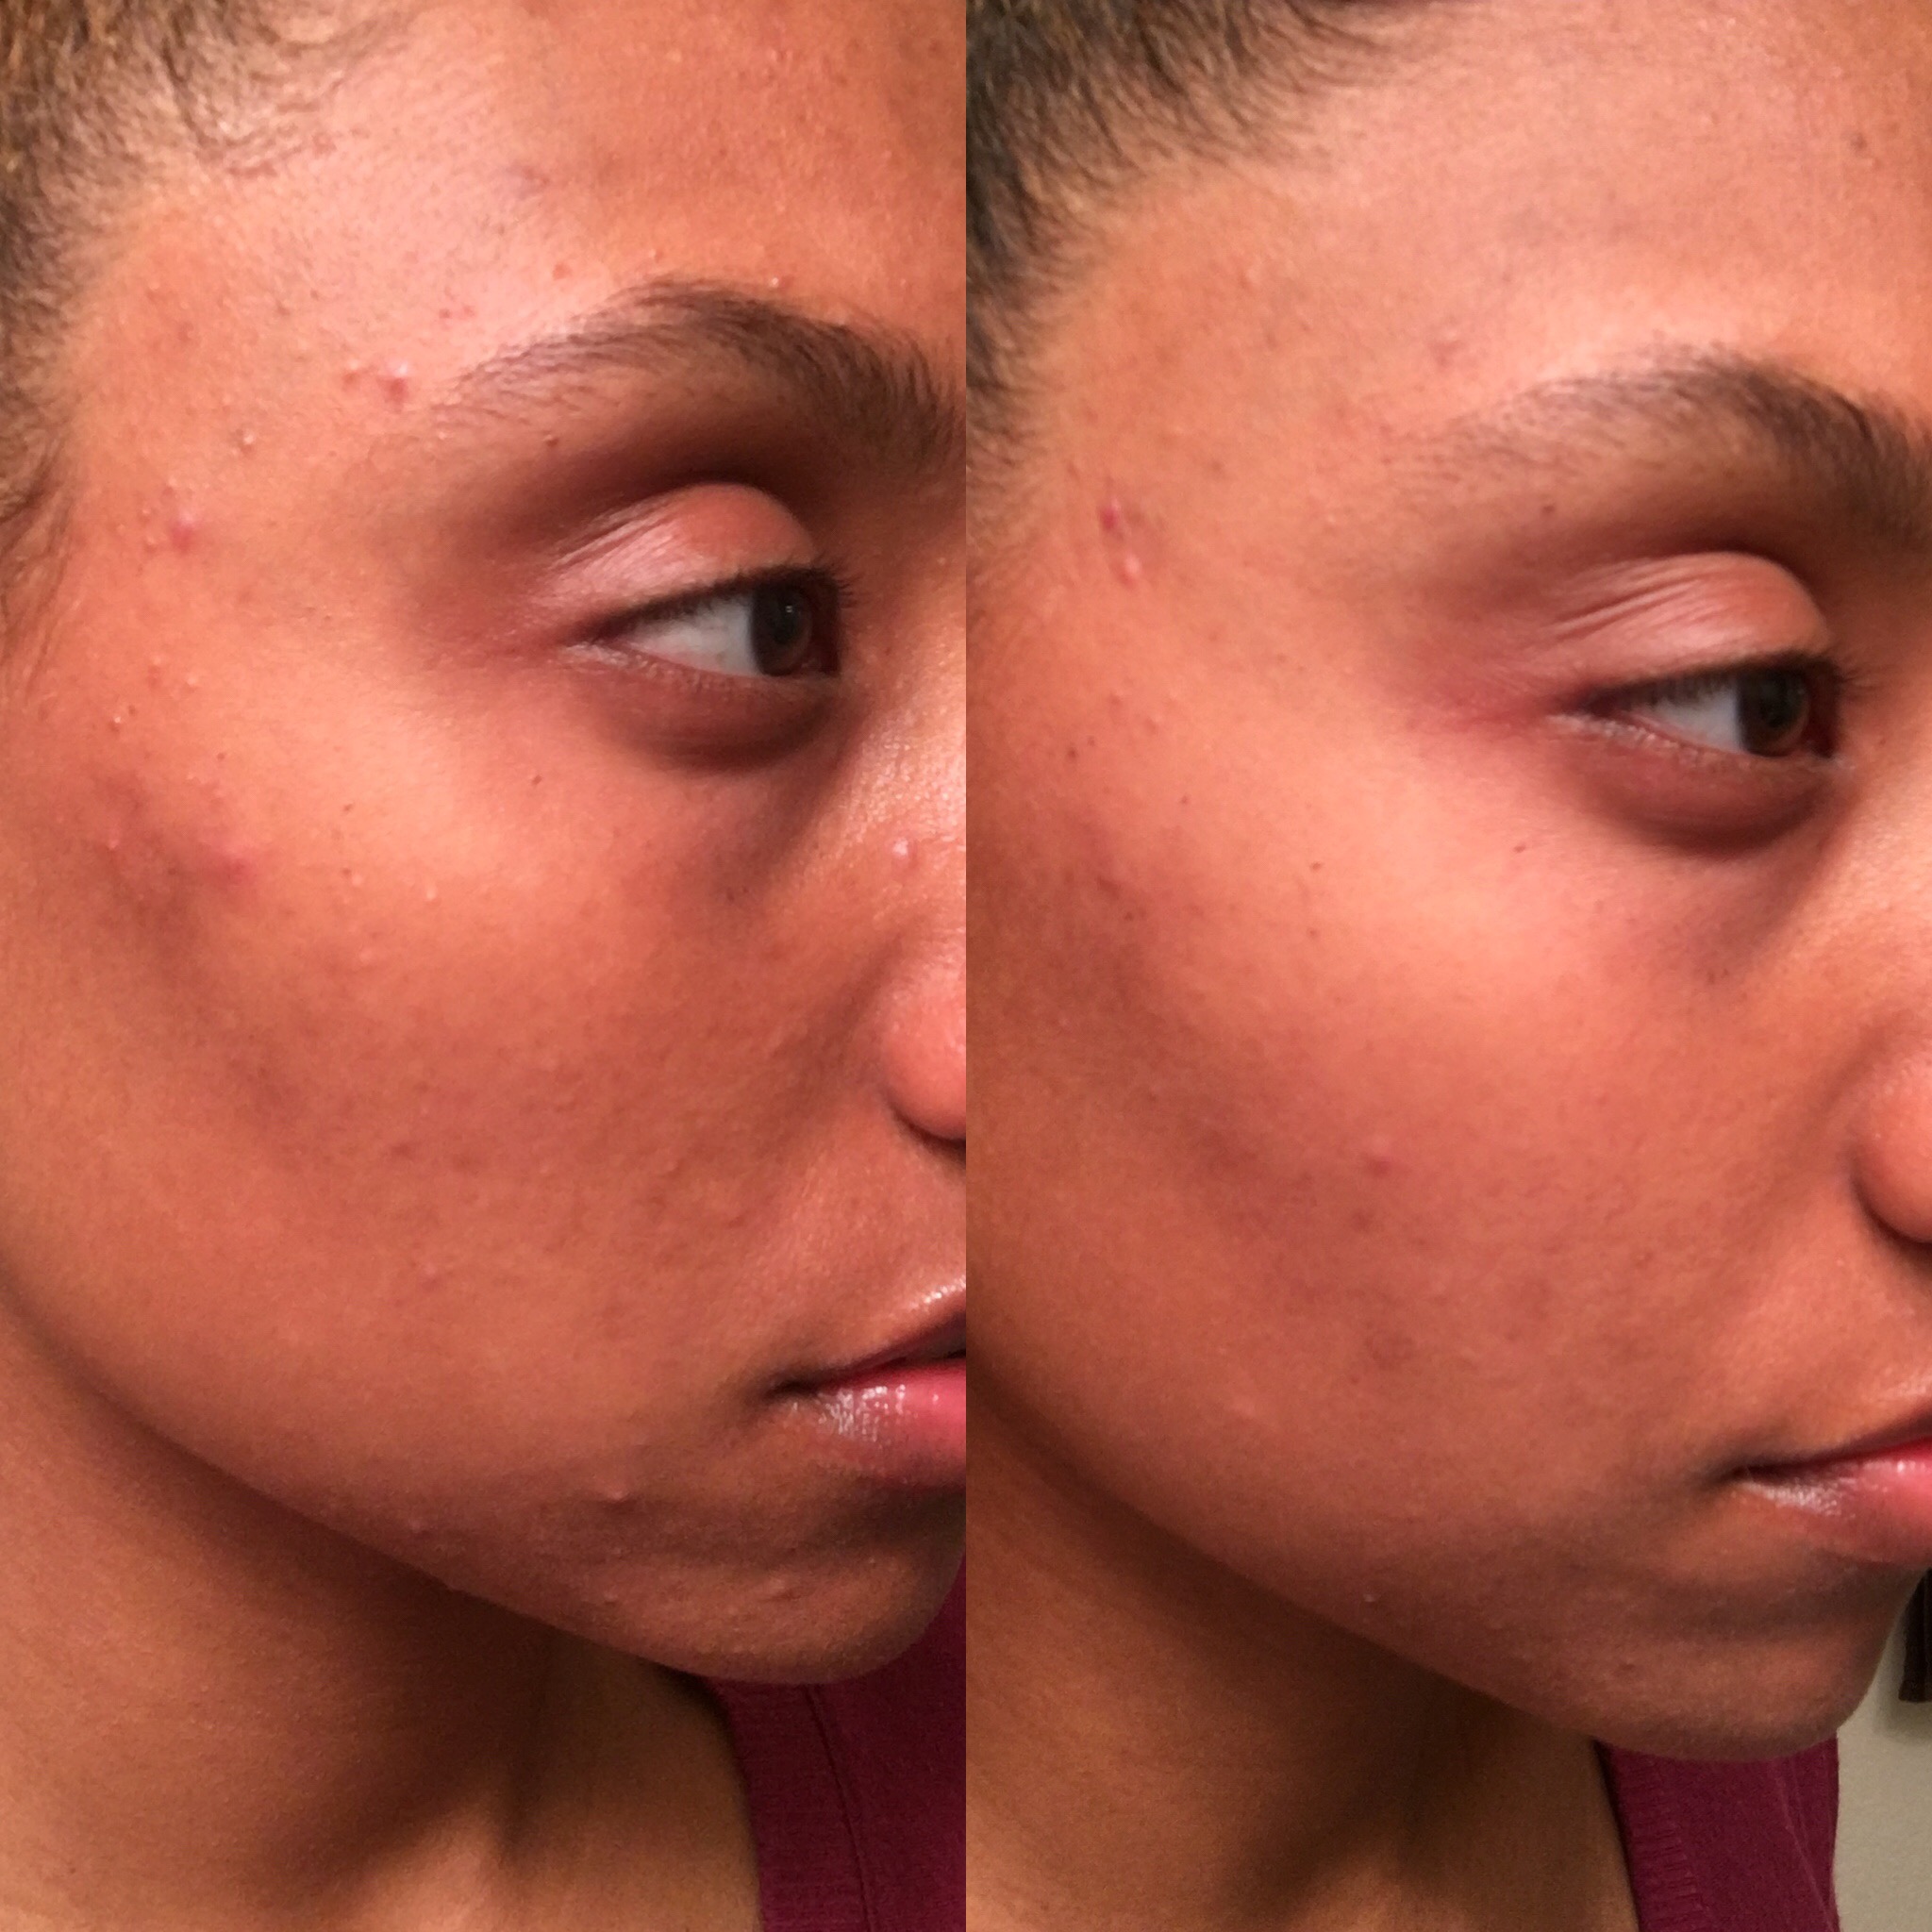 before and after using Kiehl's Blue Herbal Treatment Acne Cleanser